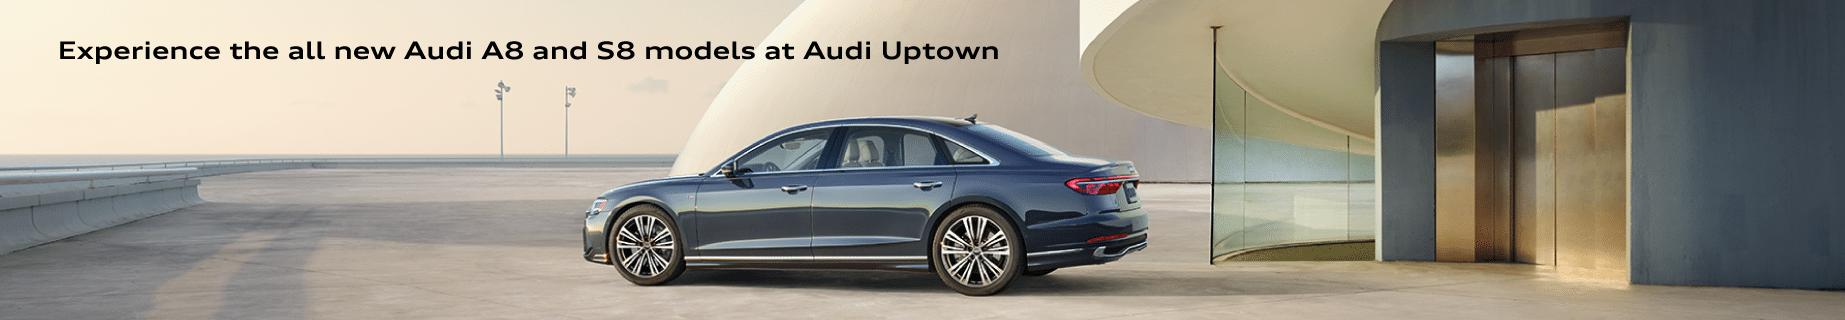 All New 2022 Audi A8 and S8 at Audi Uptown